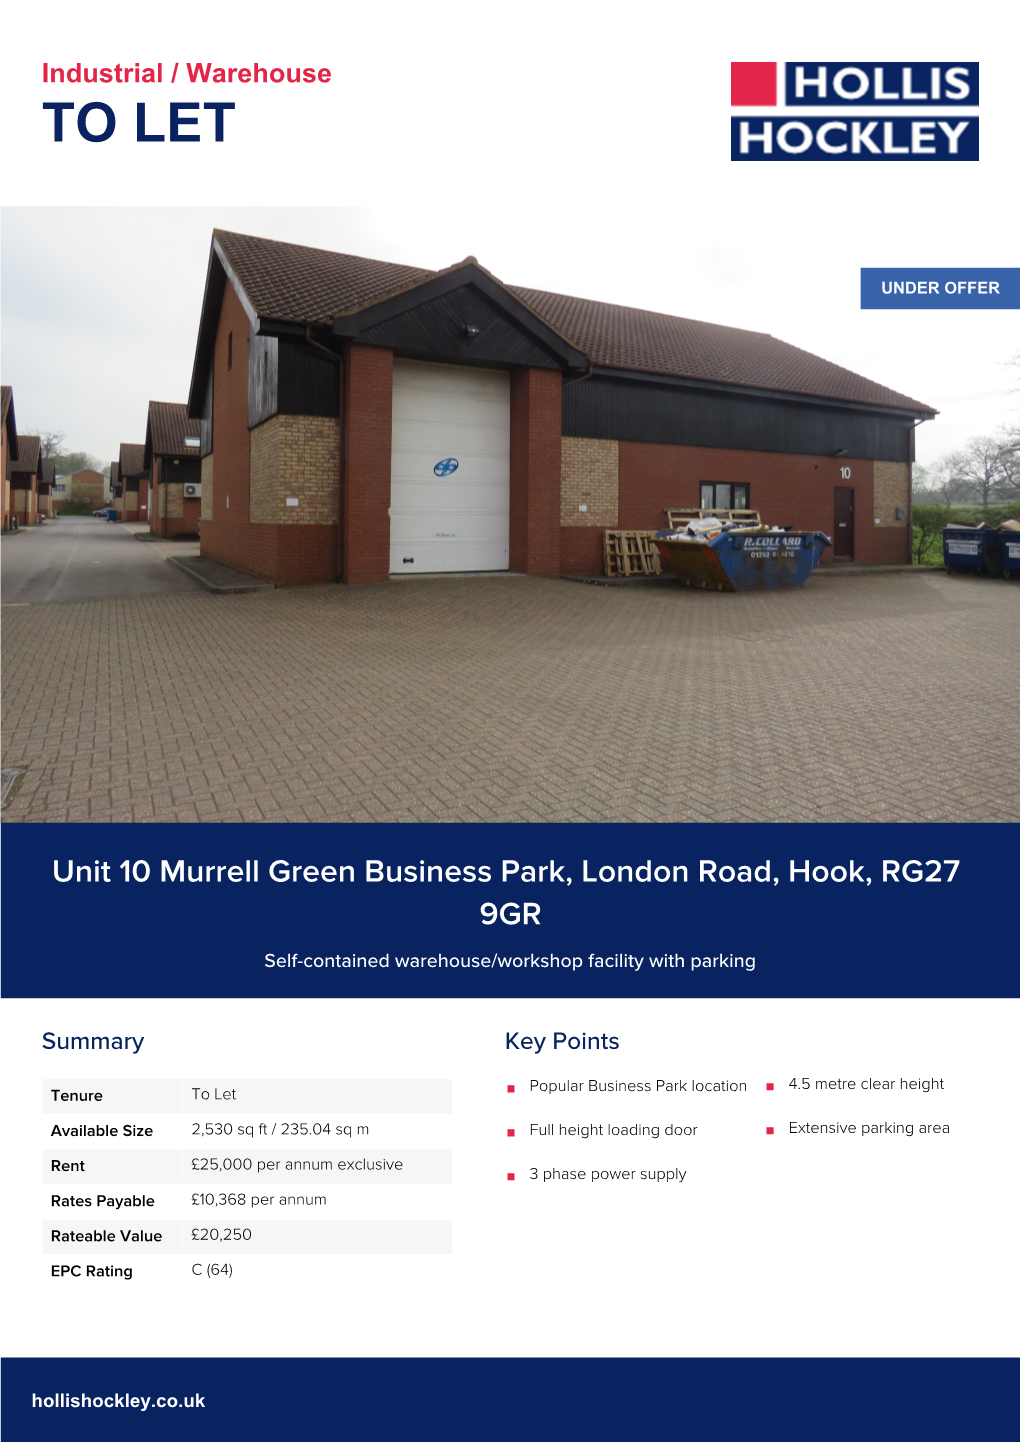 Unit 10 Murrell Green Business Park, London Road, Hook, RG27 9GR Self-Contained Warehouse/Workshop Facility with Parking